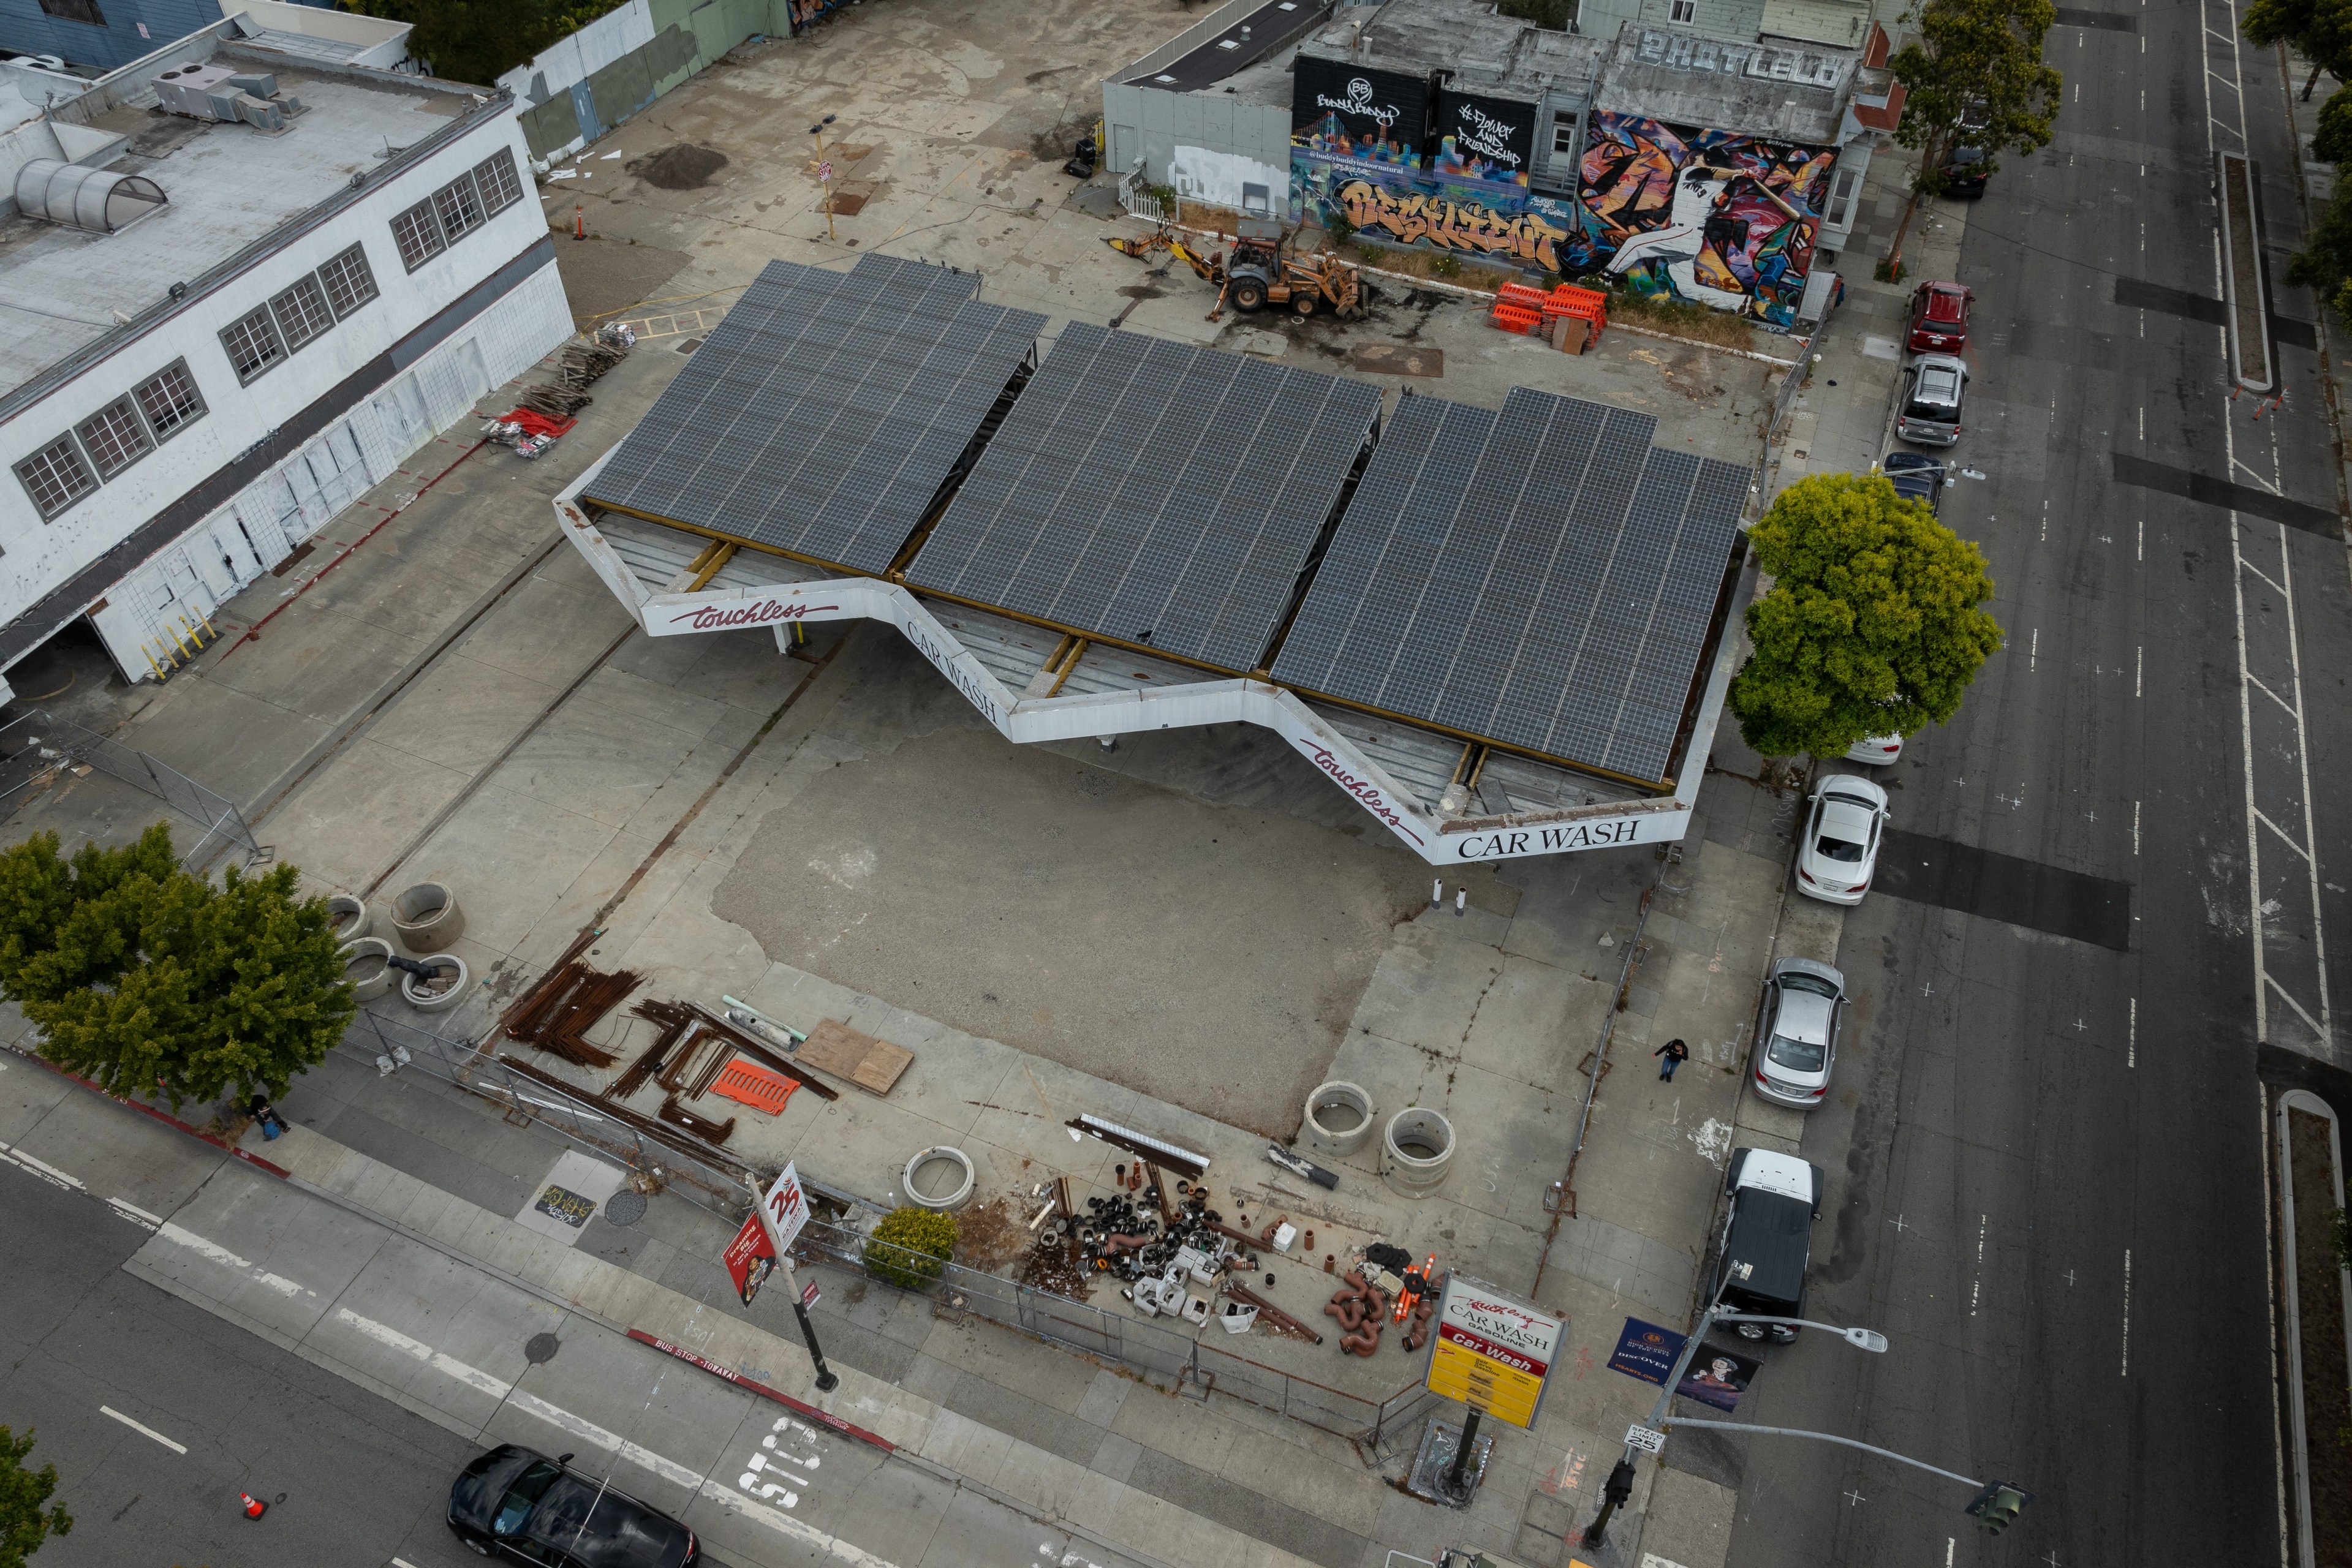 An aerial view shows a car wash with solar panels on its roof, surrounded by an industrial area, a road with parked cars, and some graffiti art on adjacent buildings.